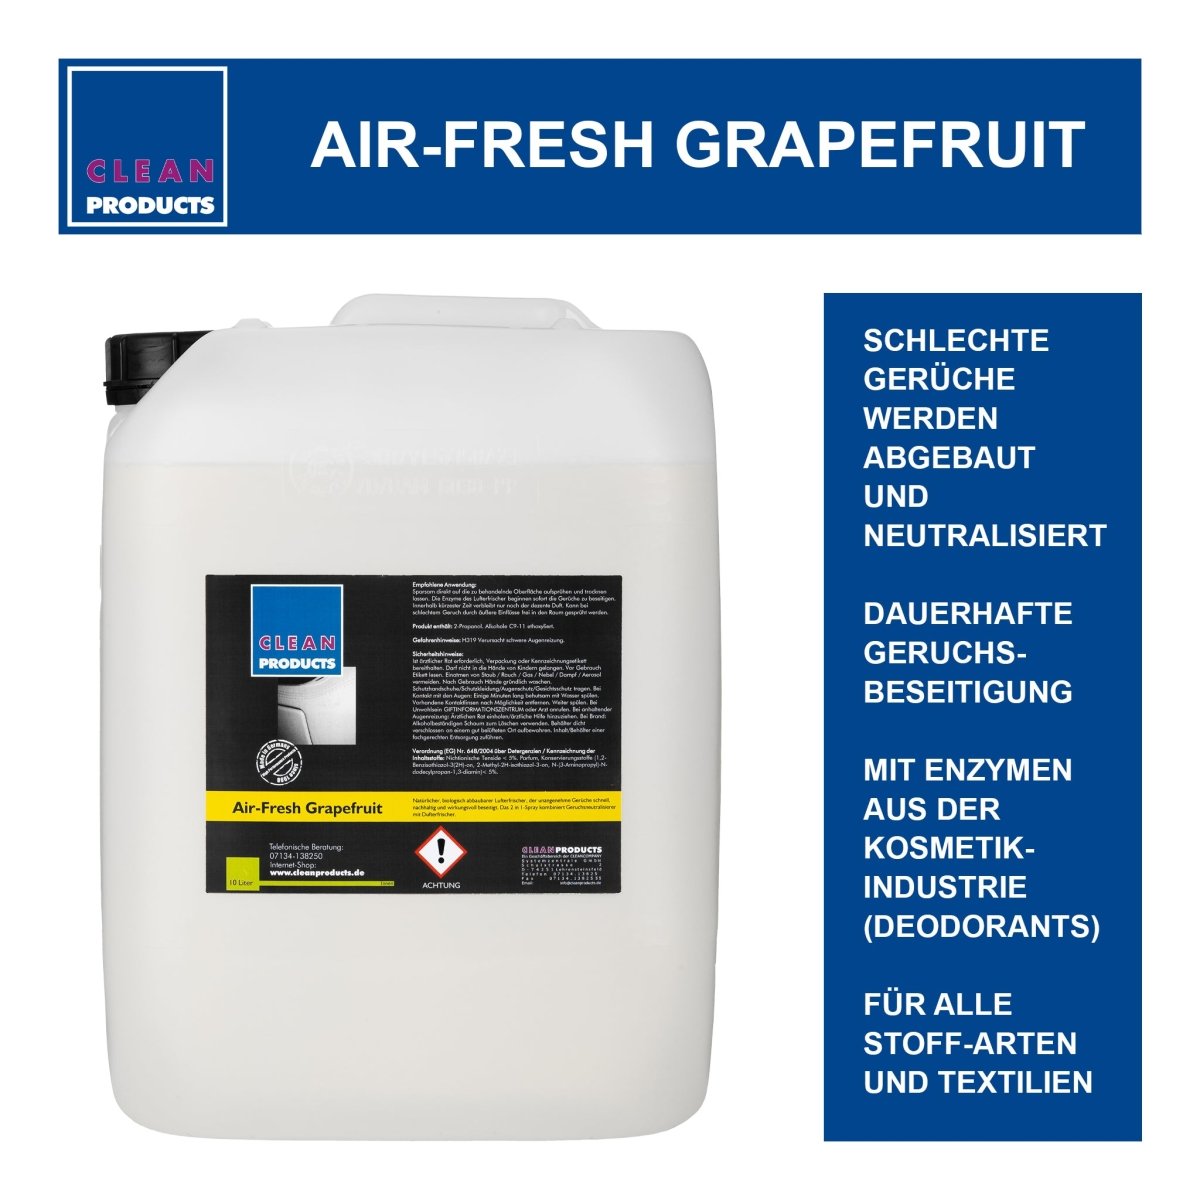 Air-Fresh Grapefruit - 10 Liter - CLEANPRODUCTS